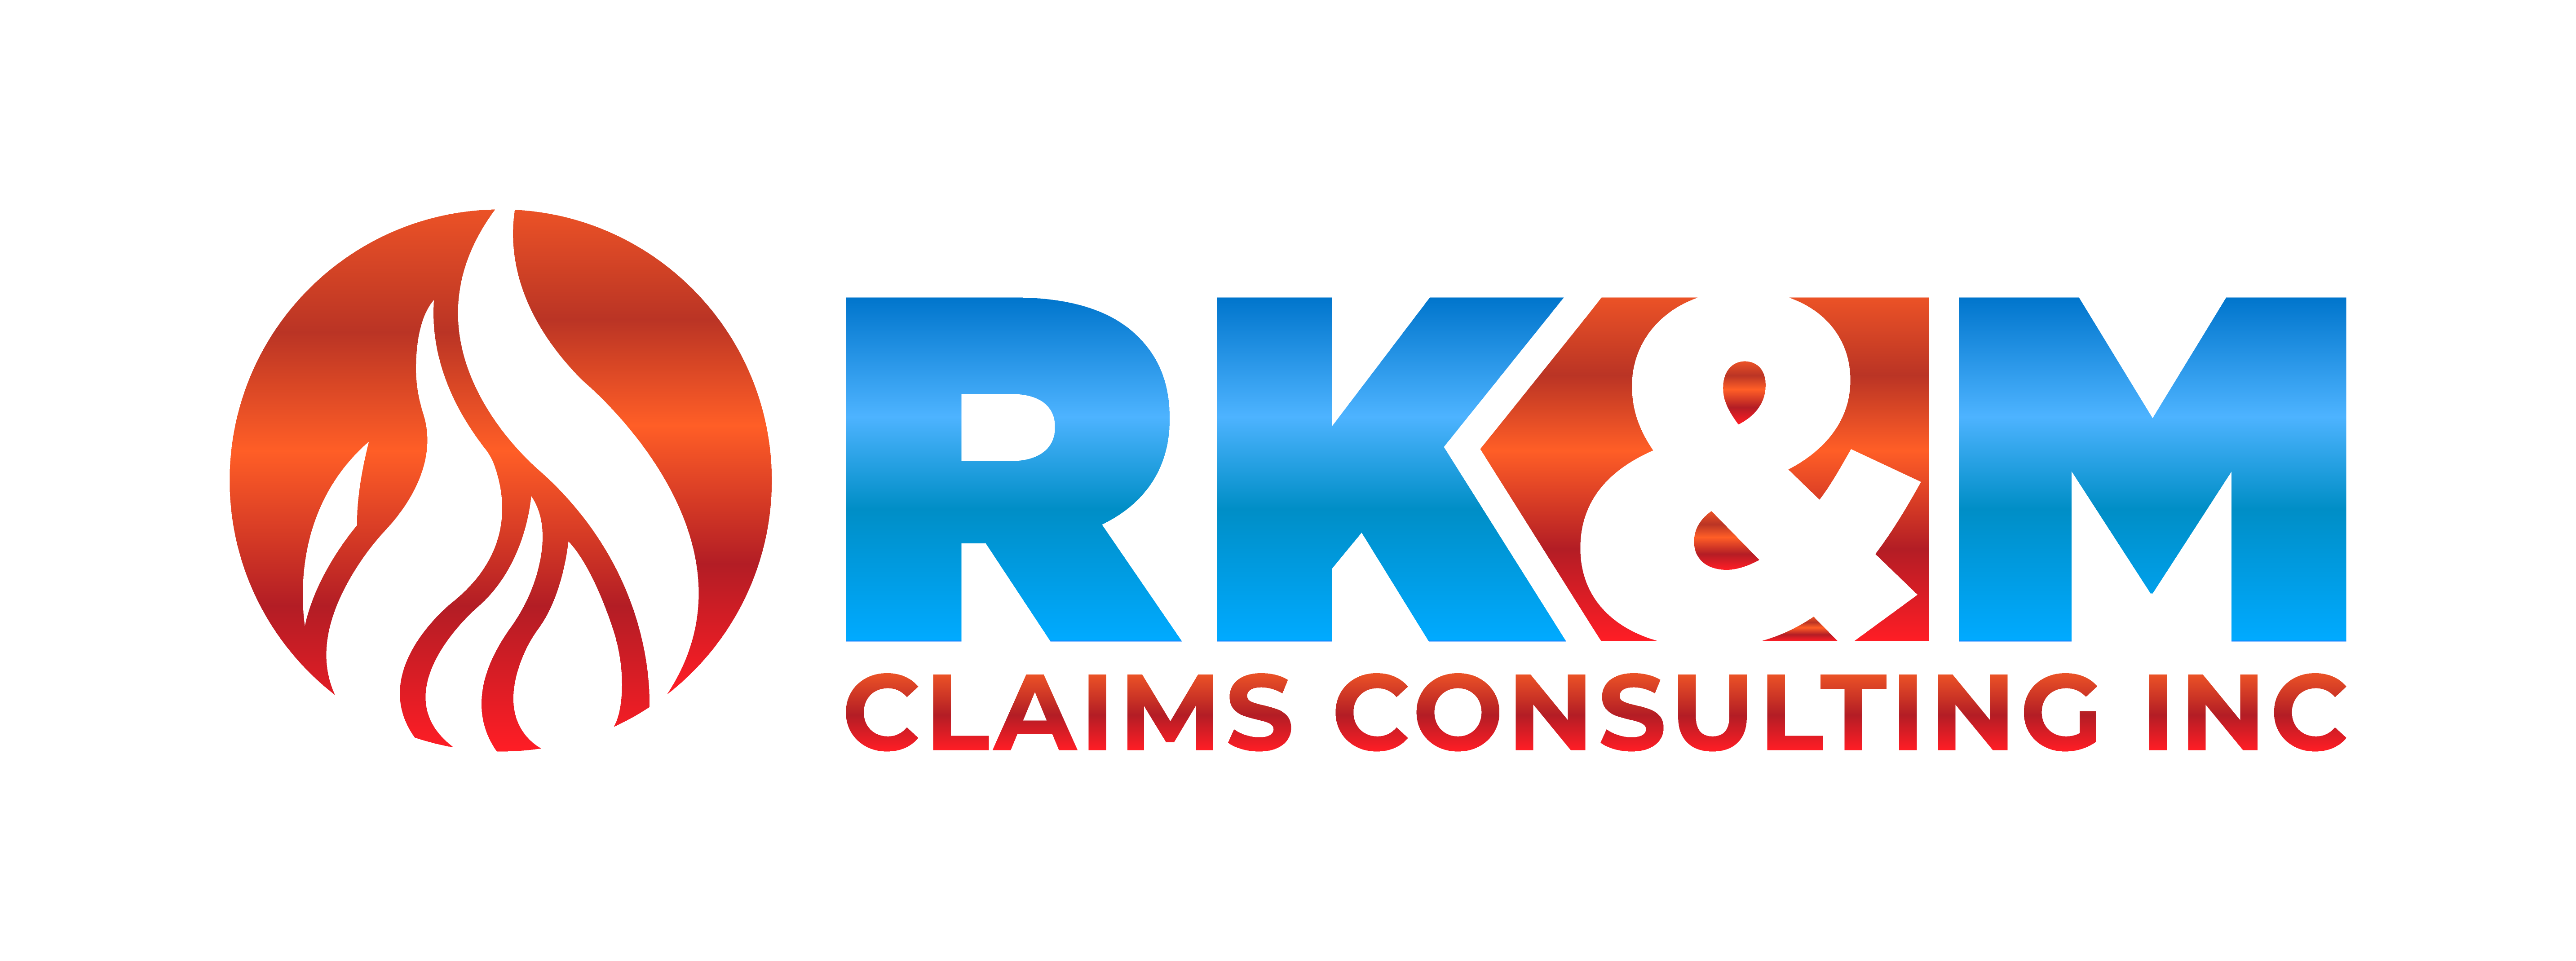 RK&M Claims Consulting